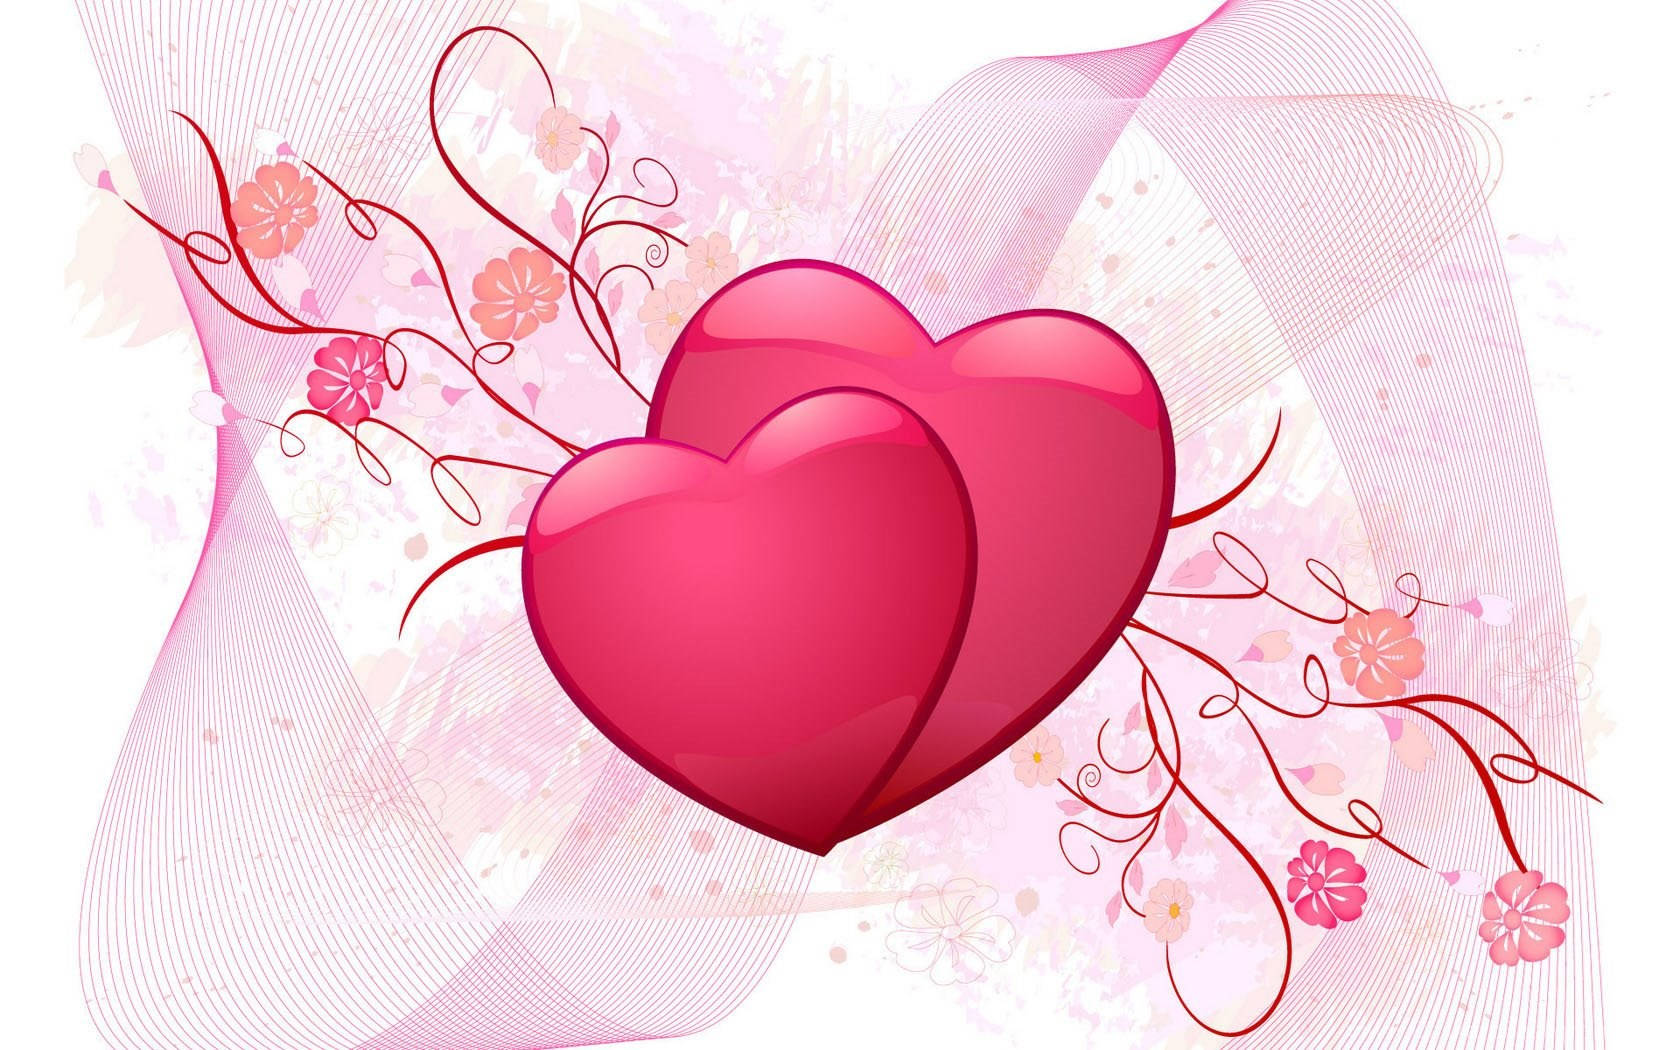 Share The Love Of Valentine's Day With These Beautiful Pink Hearts! Wallpaper